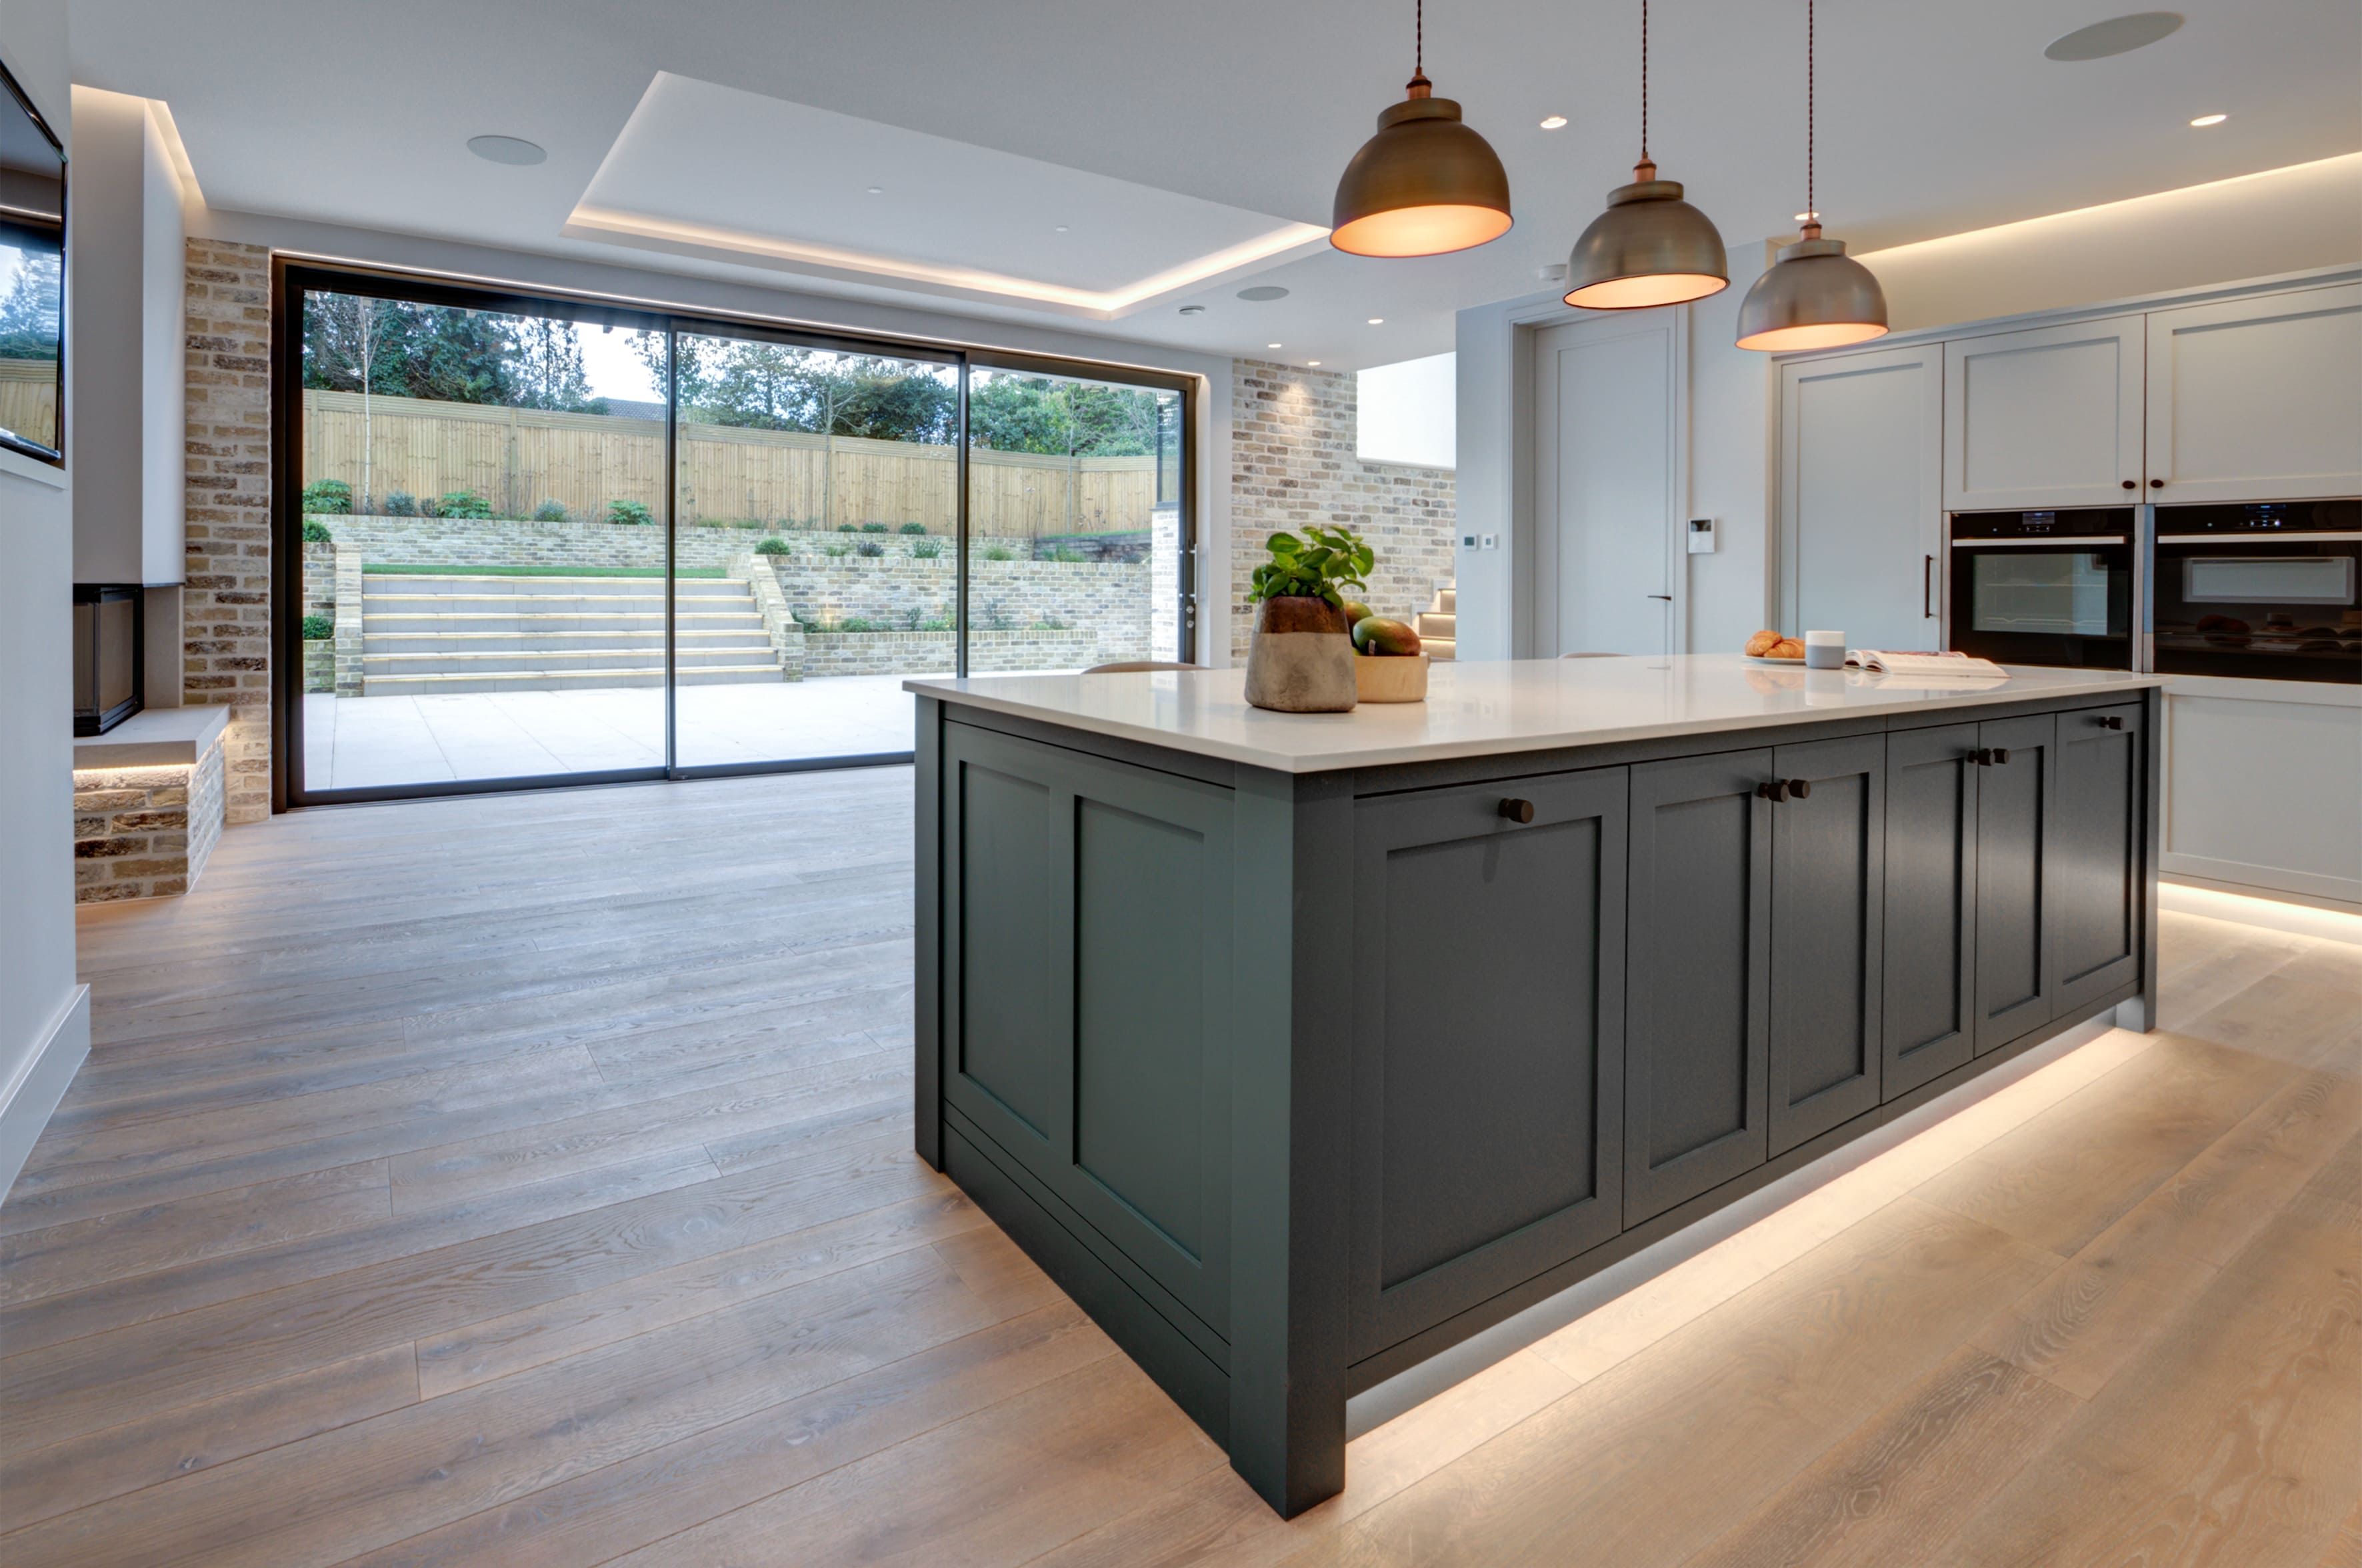 A large room with wooden tiled flooring features a large, bespoke kitchen island with under-counter lighting. Large floor-to-ceiling patio doors flood the room with natural light.